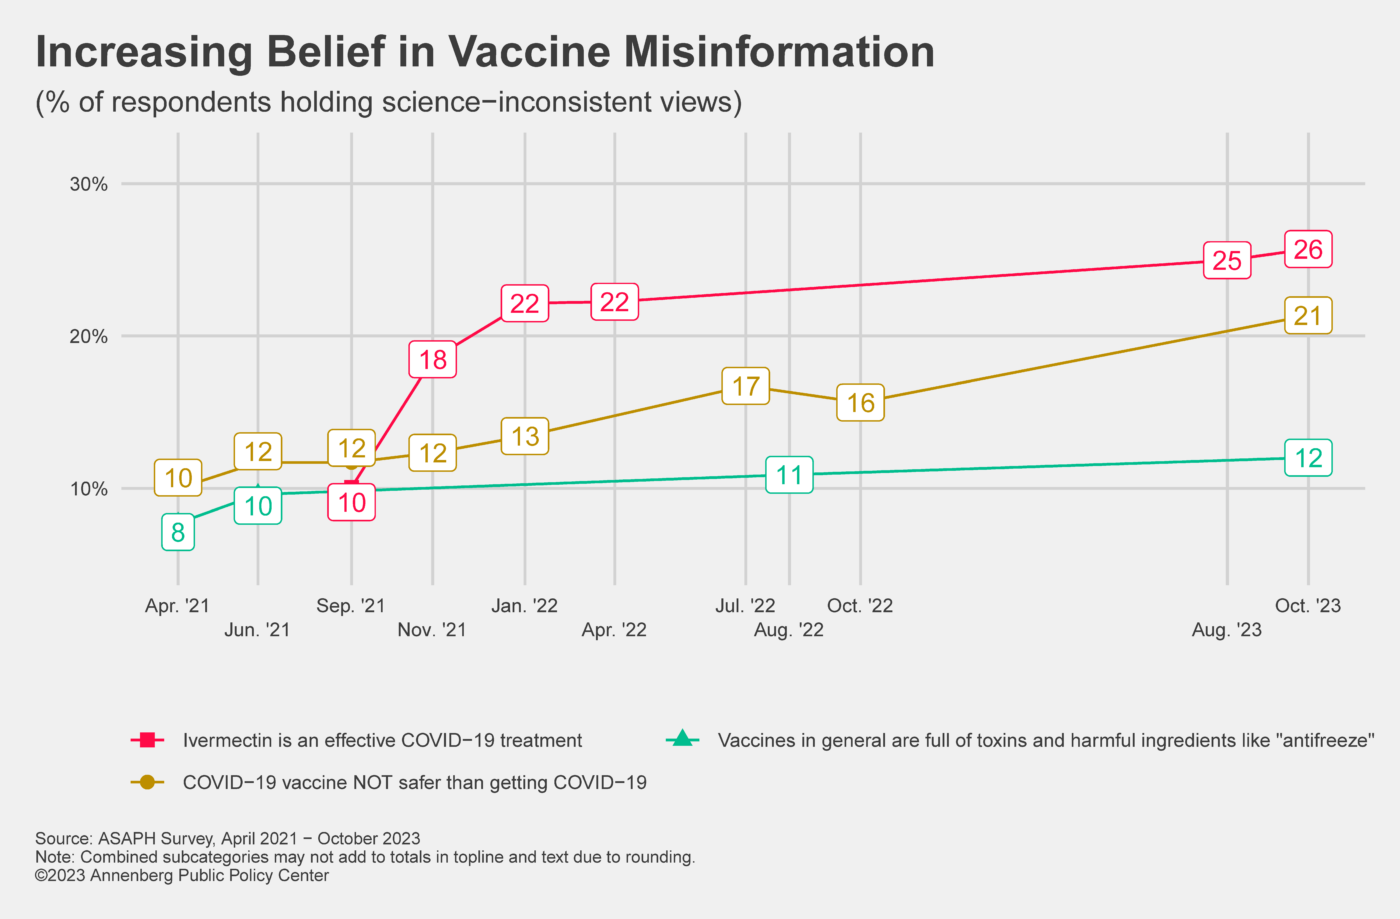 Line graph showing increasing public belief over time in 3 different statements containing vaccine misinformation. 